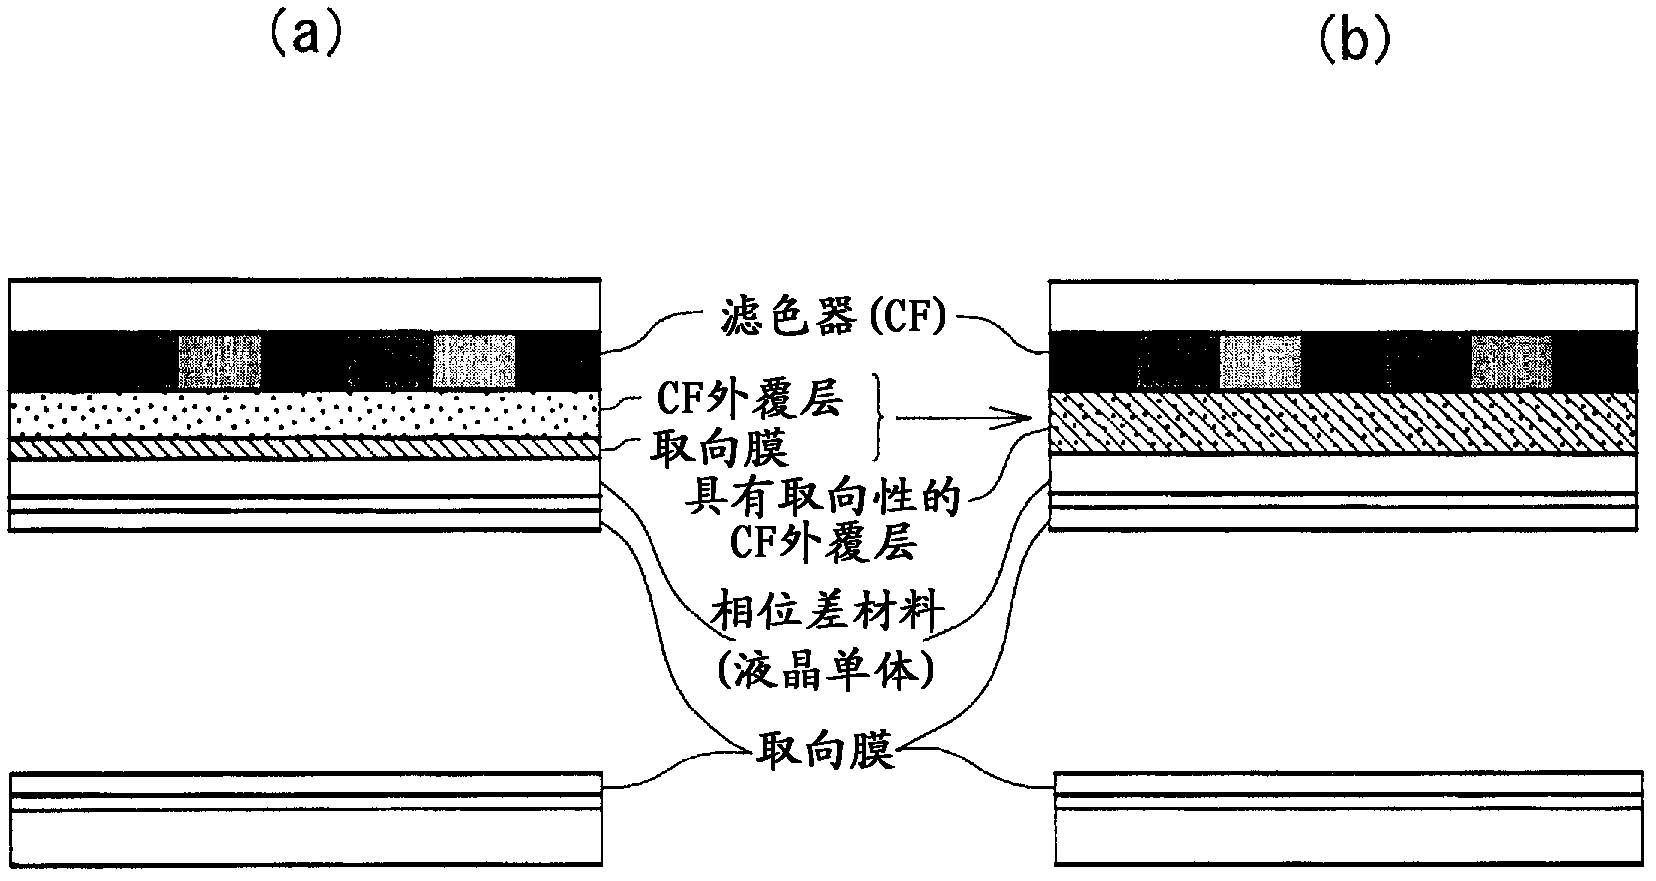 Polyester composite for forming thermoset films